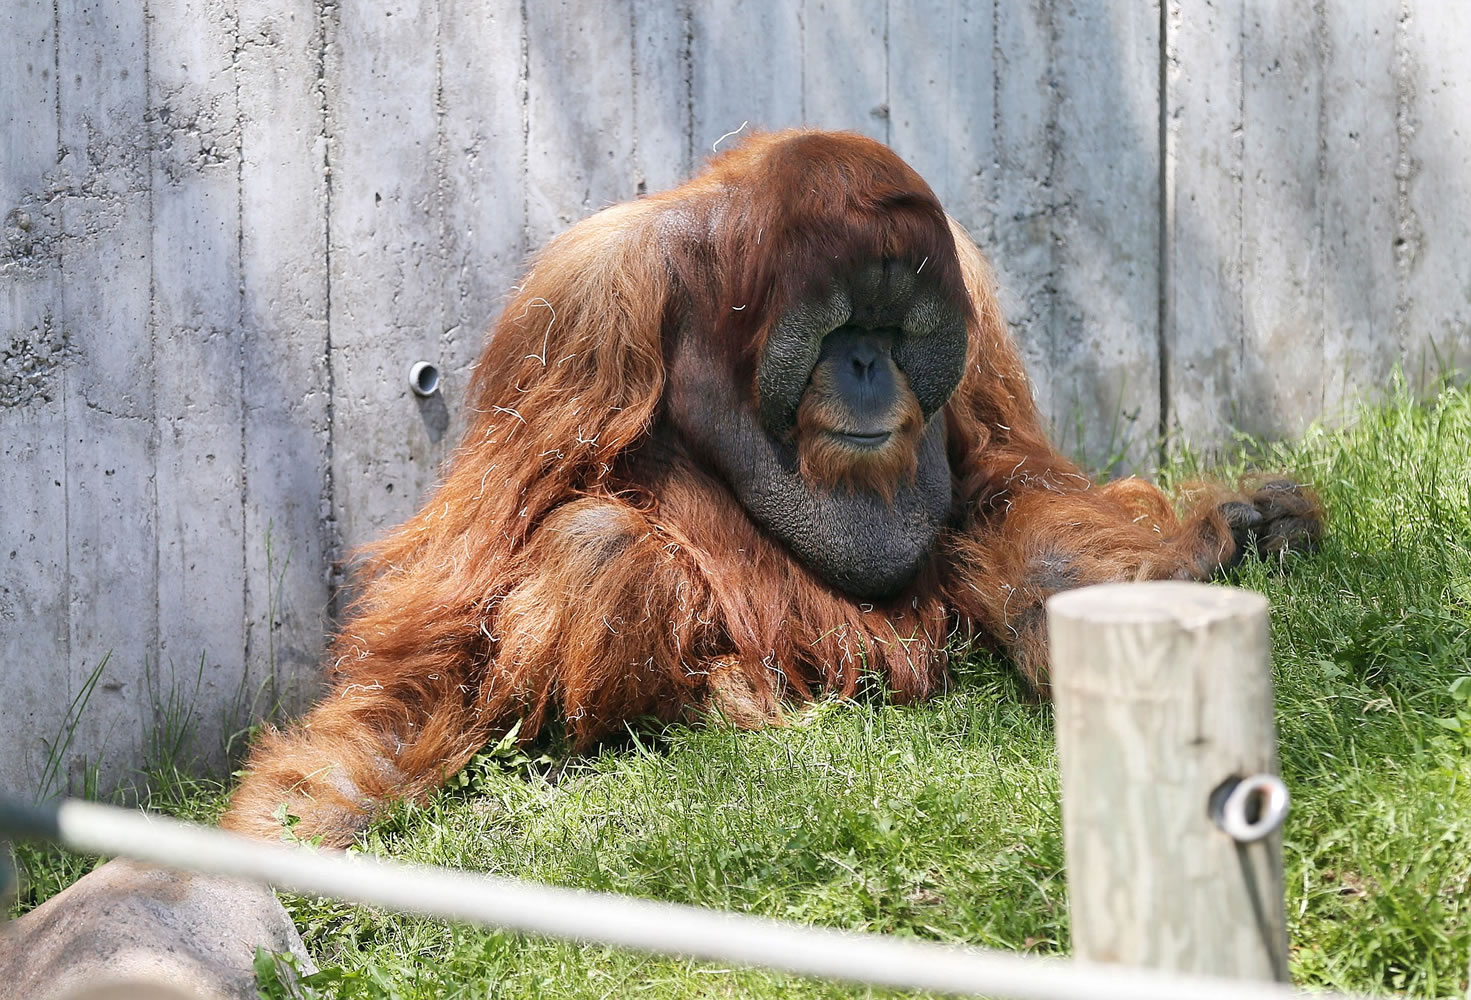 An orangutan relaxes at the Gorilla Forest at the Como Park Zoo in St.